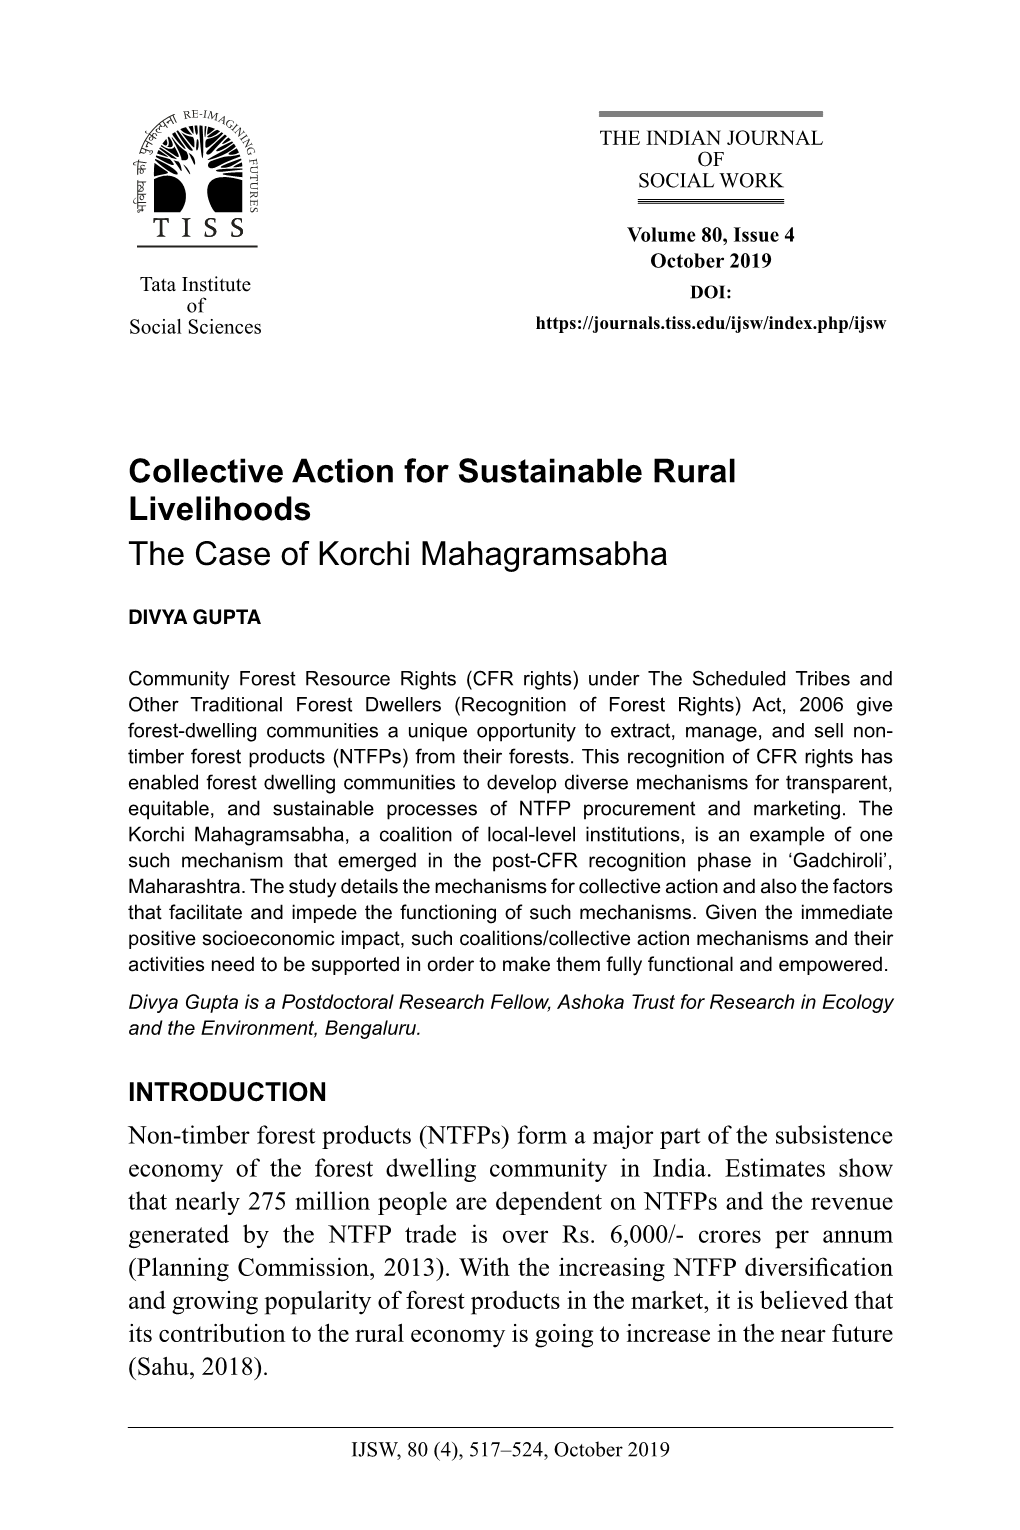 Collective Action for Sustainable Rural Livelihoods the Case of Korchi Mahagramsabha